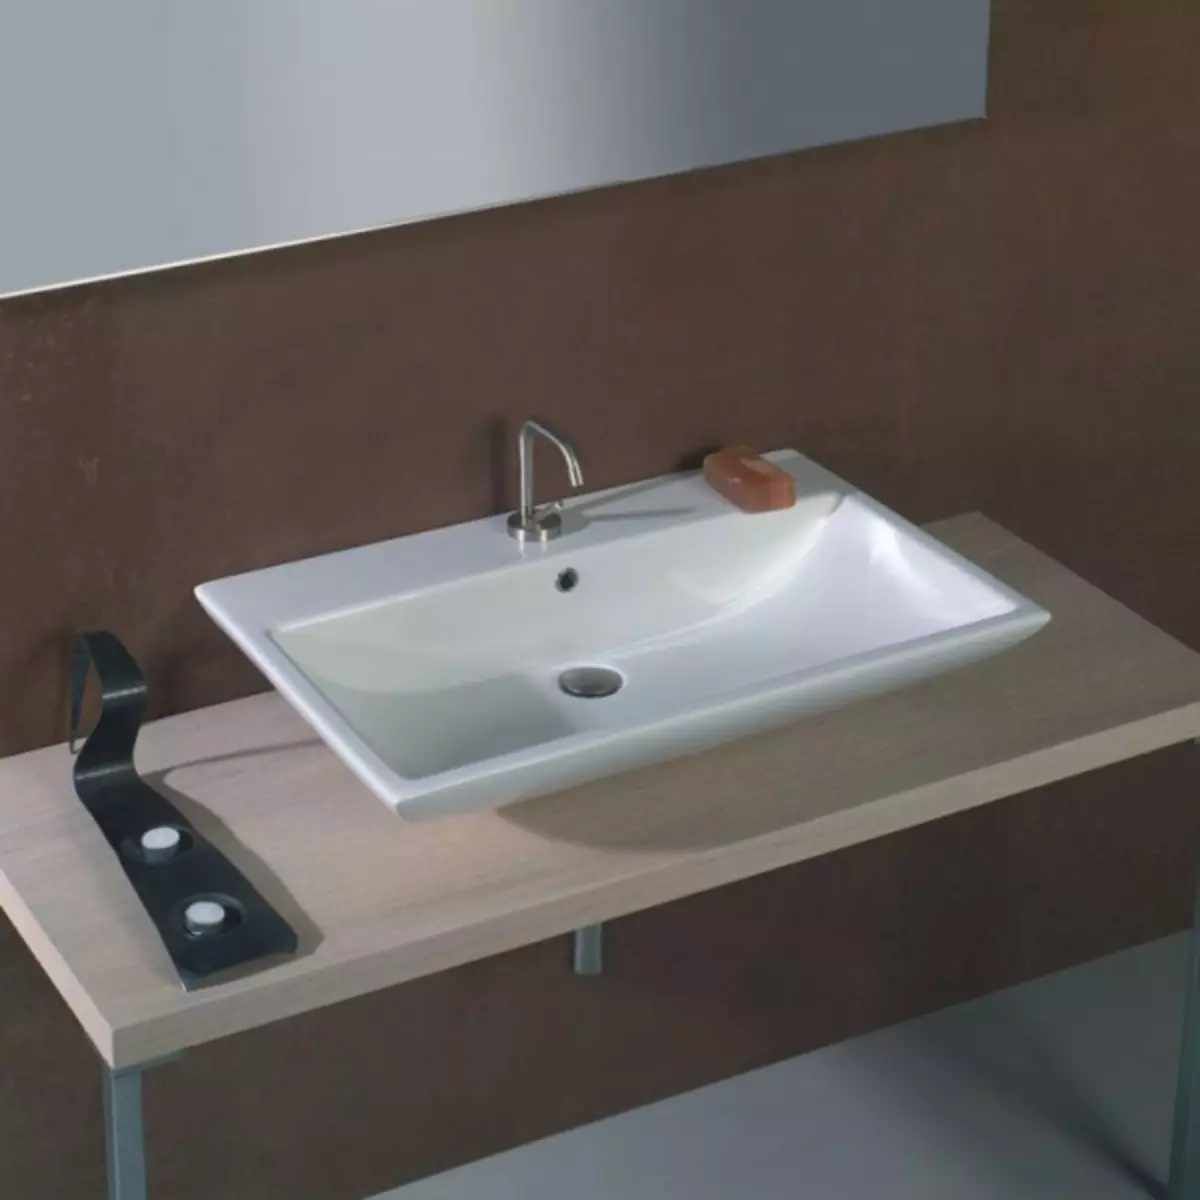 Bathroom sink - 105 photos of the best new products from the catalog